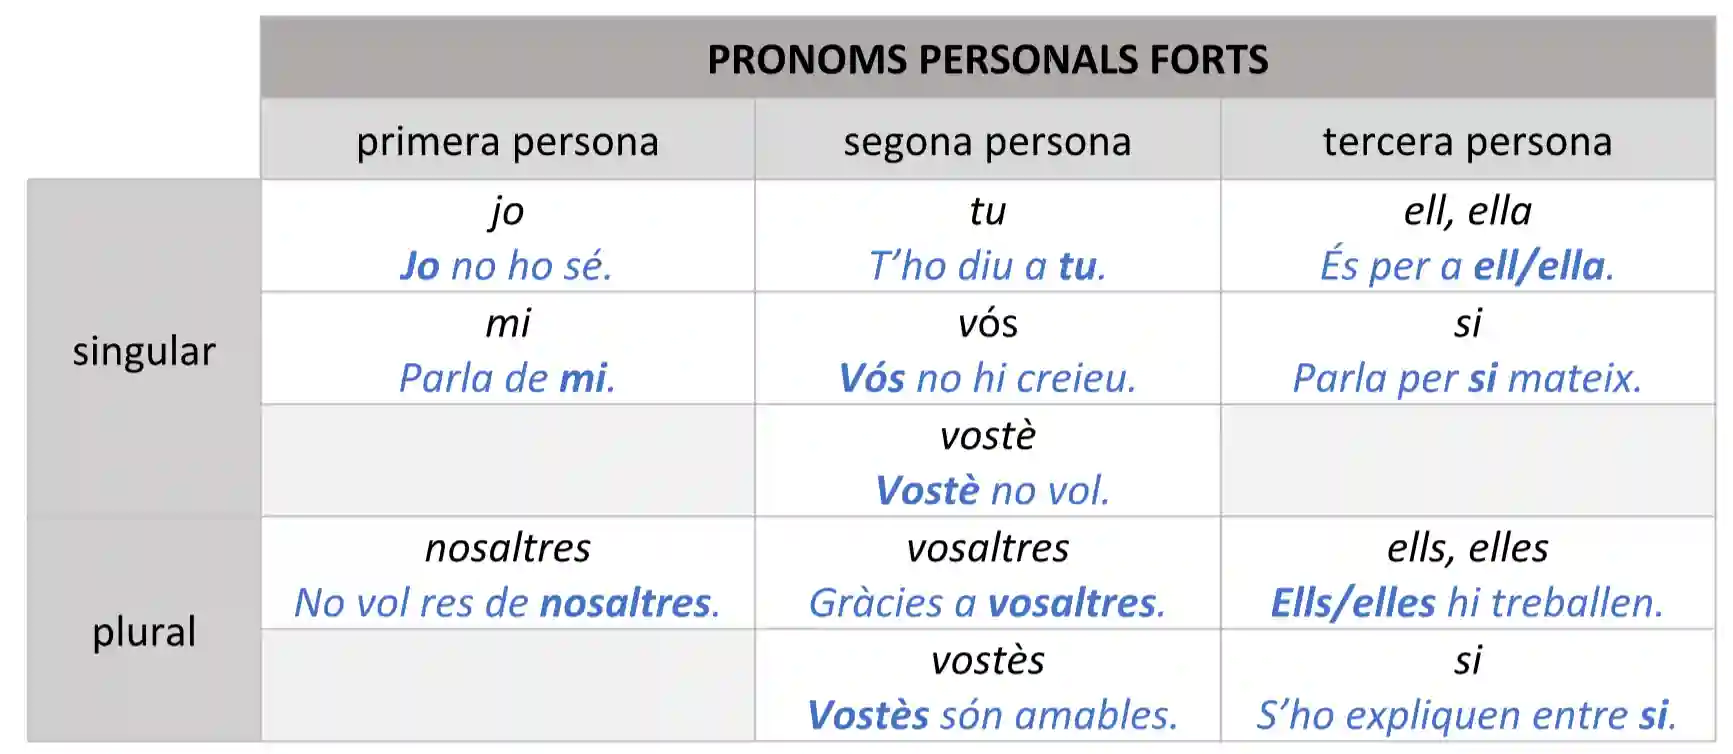 pronoms personals forts